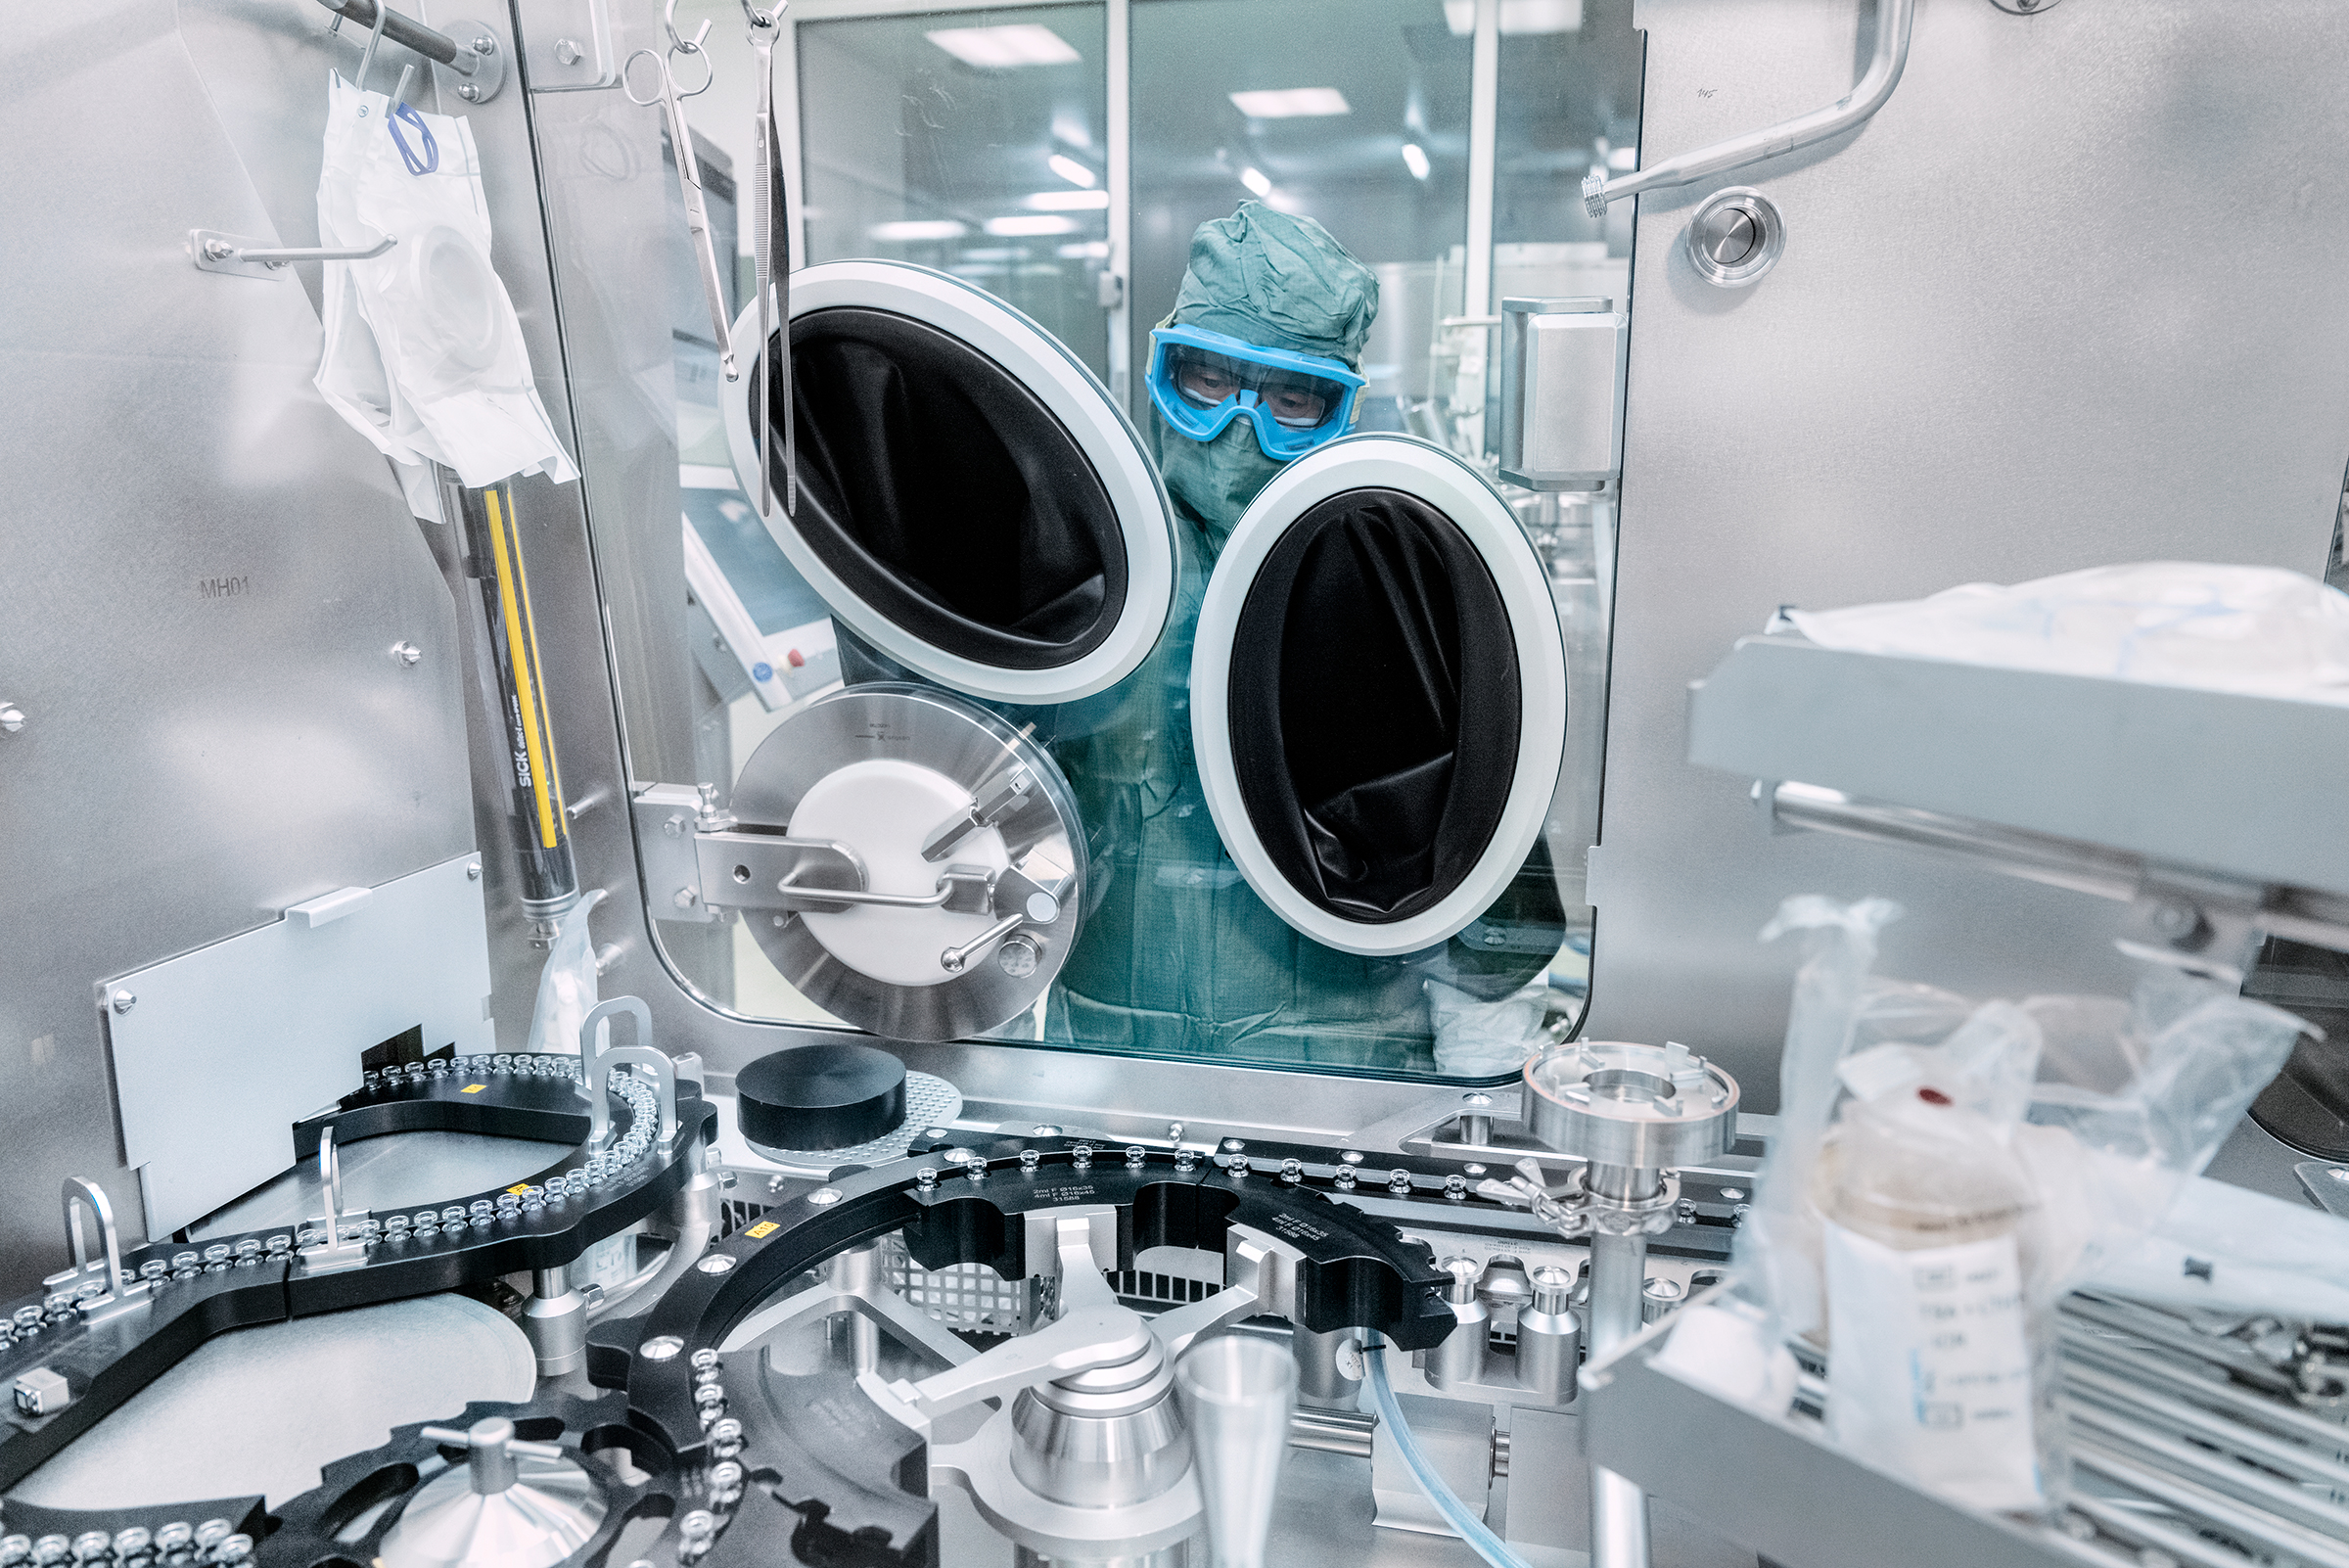 At the fill-and-finish facility operated by Baxter in Halle, 120 miles north of Marburg, technicians monitor the washing and sterilization of the vials before they are filled with vaccine, then stoppered and sealed. (Luca Locatelli for TIME)